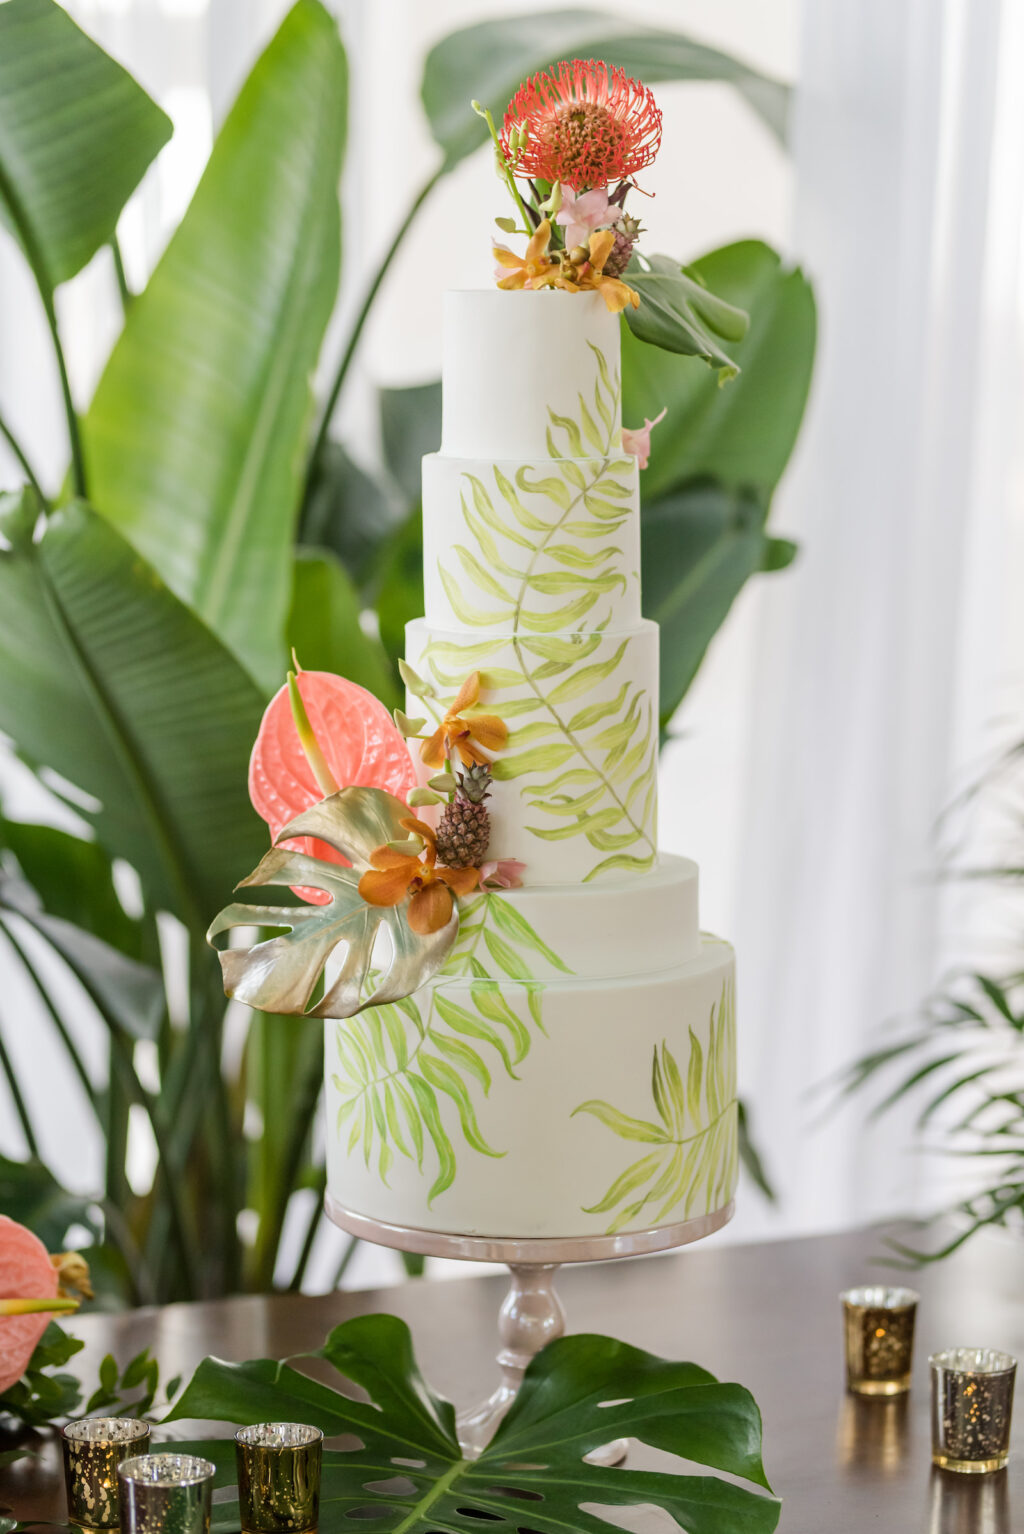 Five Tier White and Green Palm Leave Painted Wedding Cake Decorated with Pink Anthurium, Gold Painted Monstera Leaf, Mini Pineapple, Pink Pin Cushion Flower Cake Topper | Tampa Bay Wedding Planner Eventfull Weddings